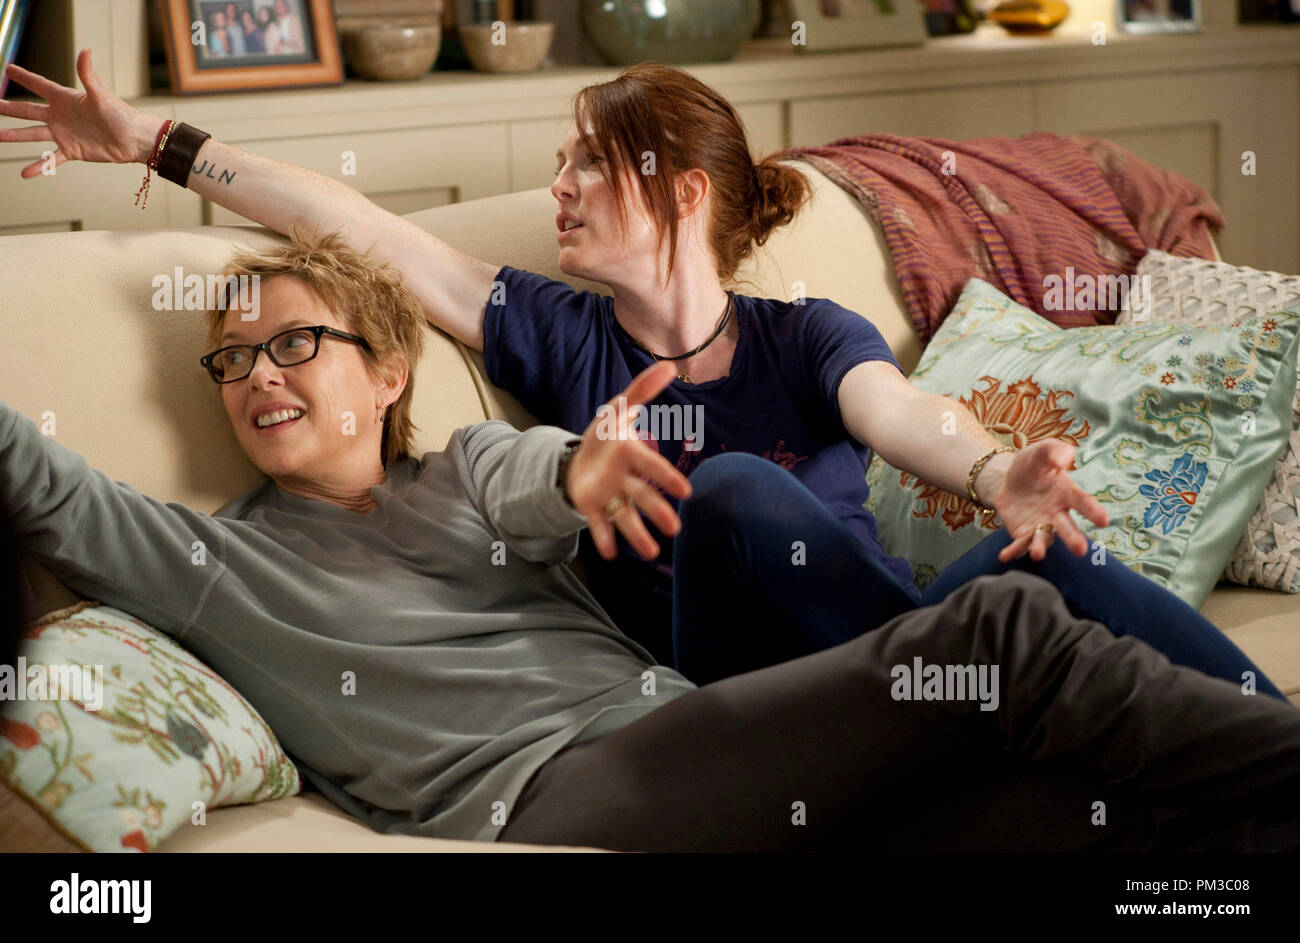 Annette Bening (left) and Julianne Moore (right) star as Nic and Jules in Lisa Cholodenko’s THE KIDS ARE ALL RIGHT, a Focus Features release. Stock Photo